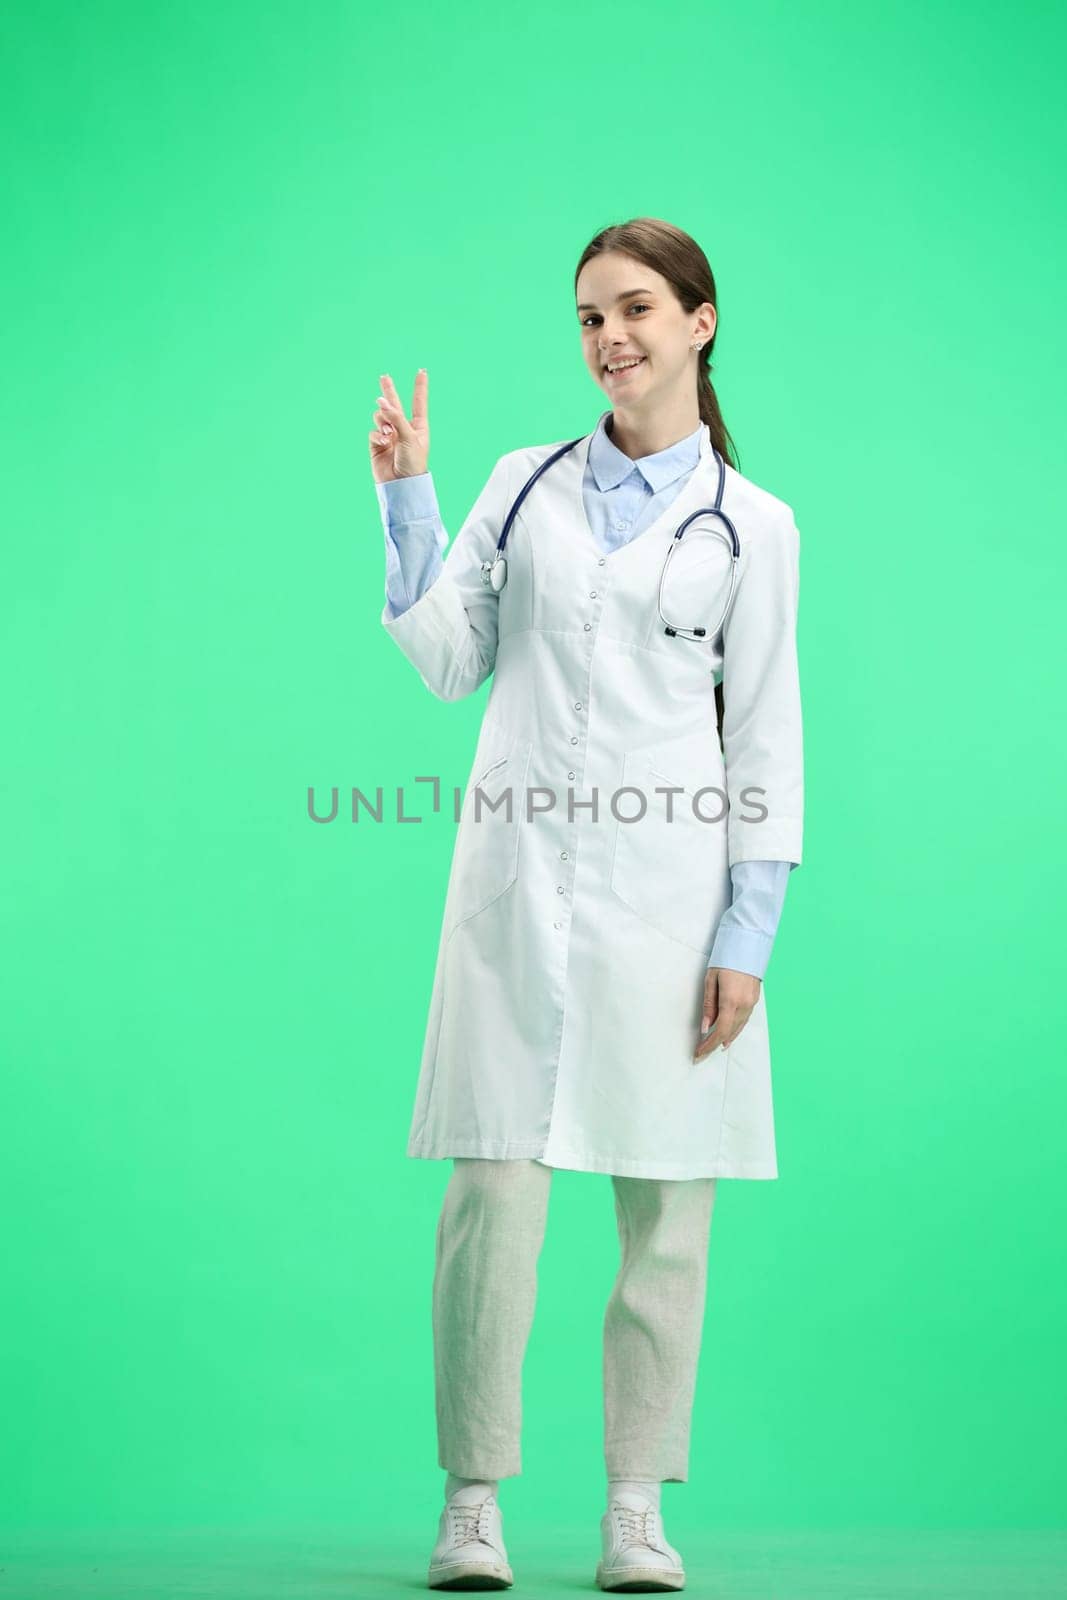 A female doctor, full-length, on a green background, shows a victory sign.